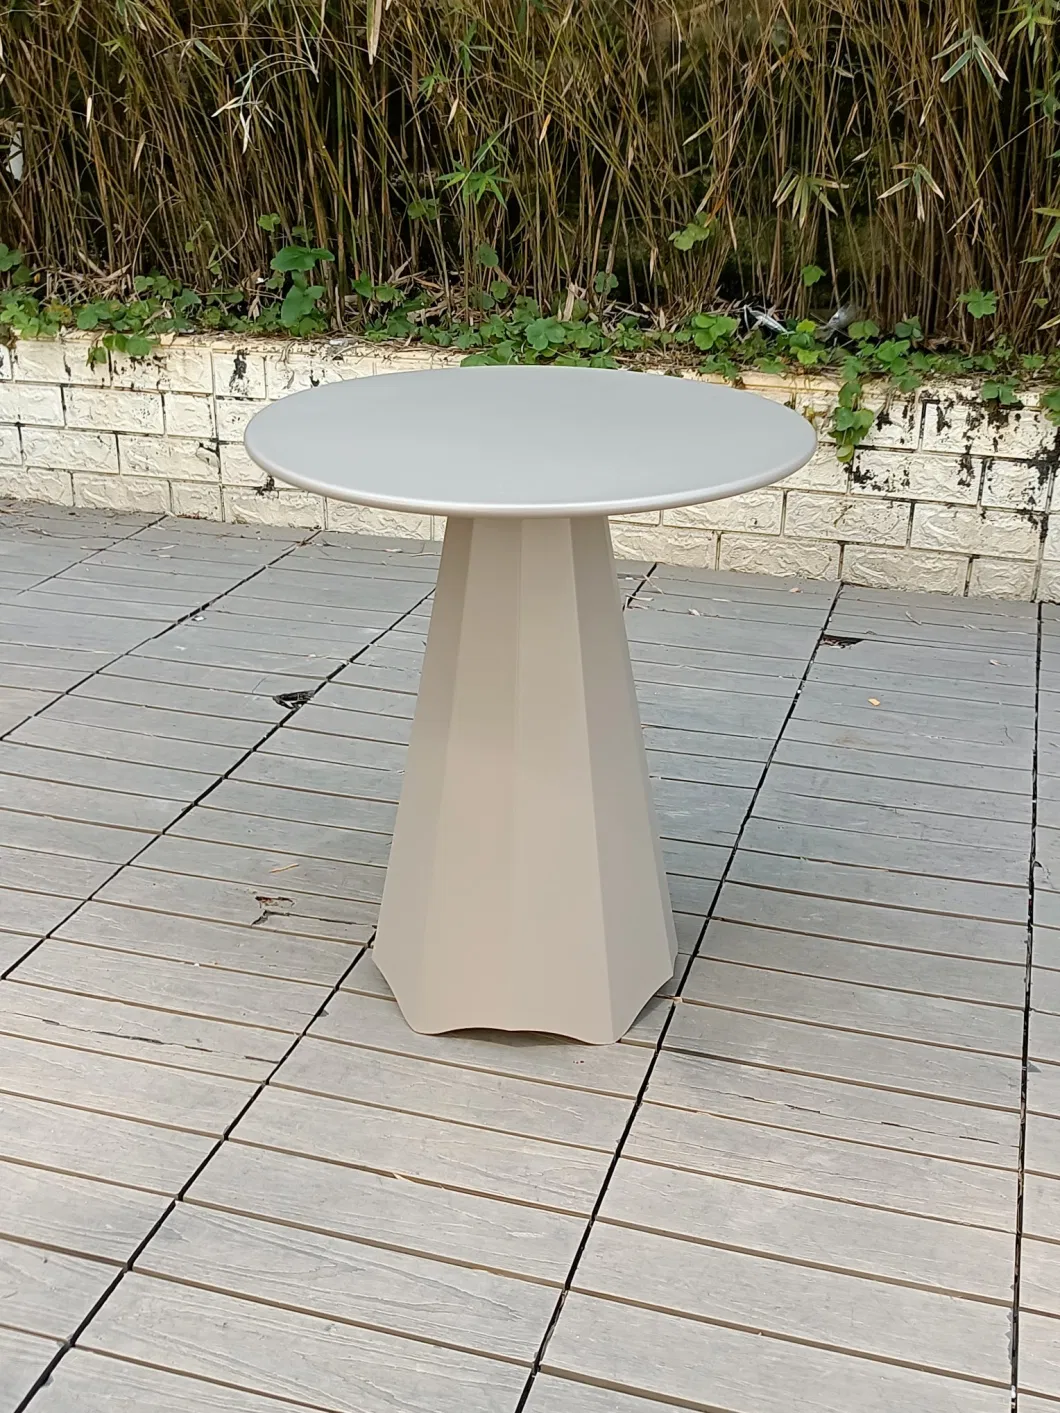 Cheap Living Room Furniture Tray Small Round Table Modern Metal Black Folding Round Outdoor Aluminum Coffee Table Side Table